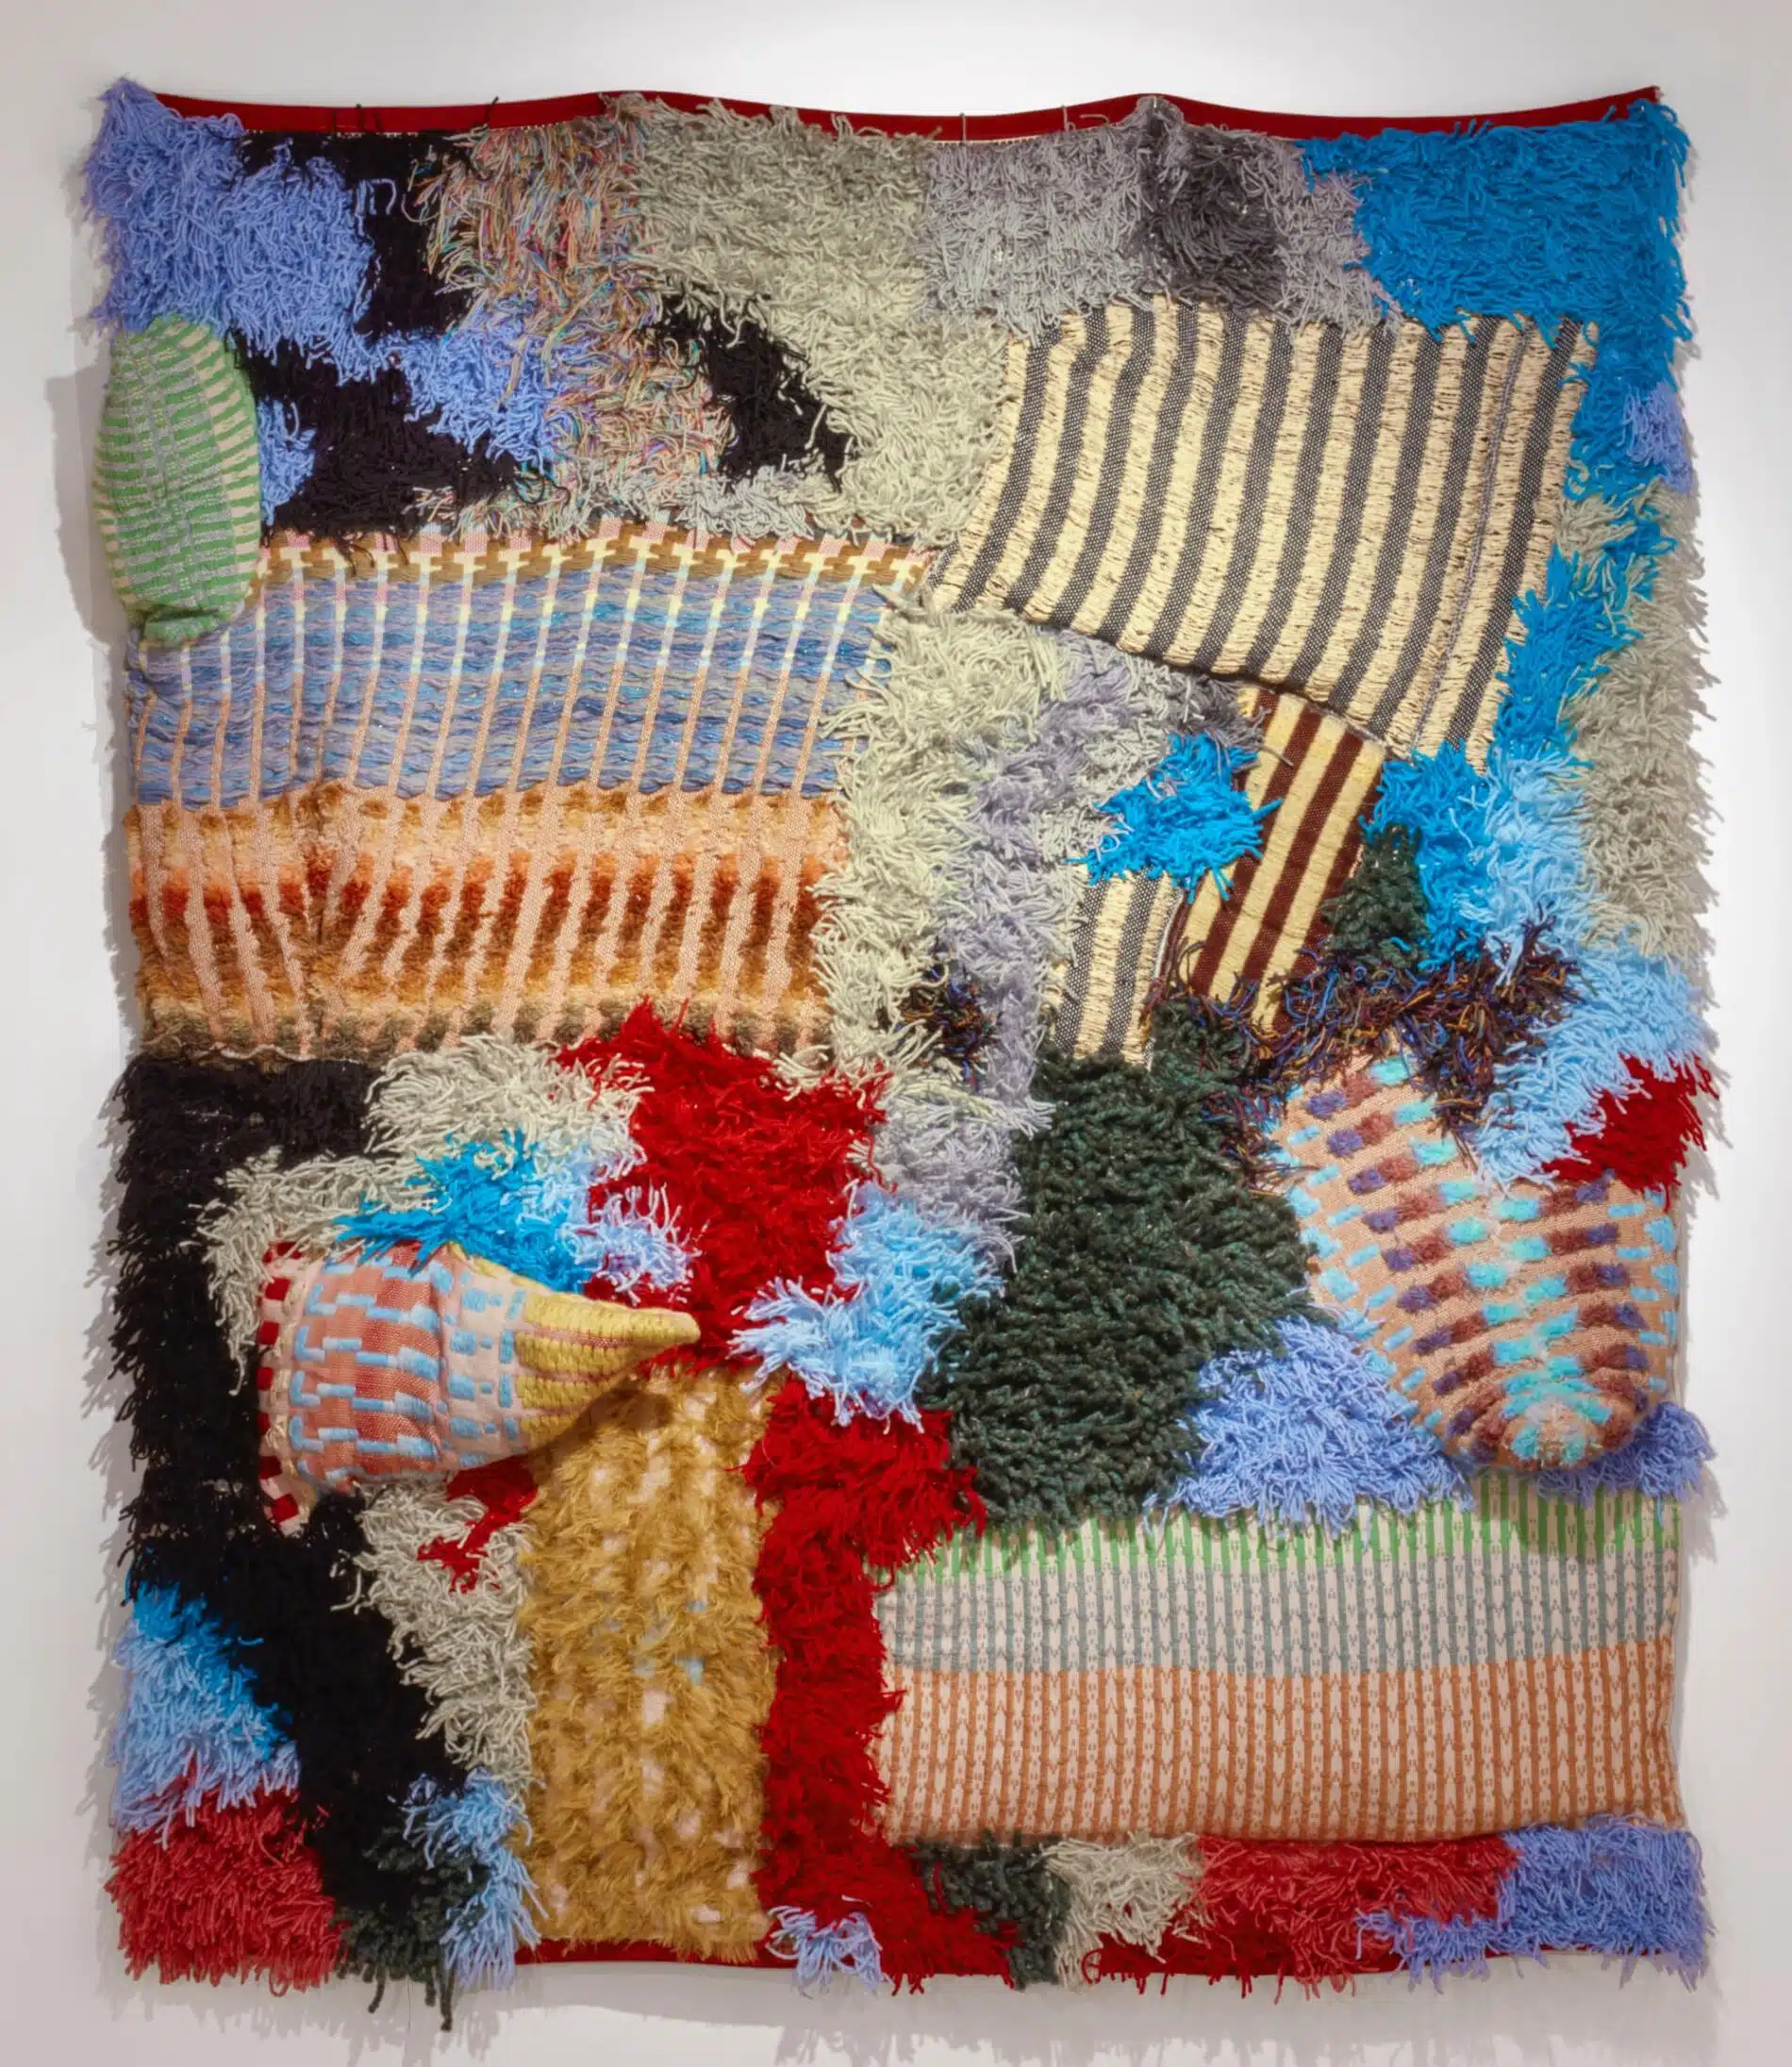 Sarah Zapata obra textil How often they move between the planets II